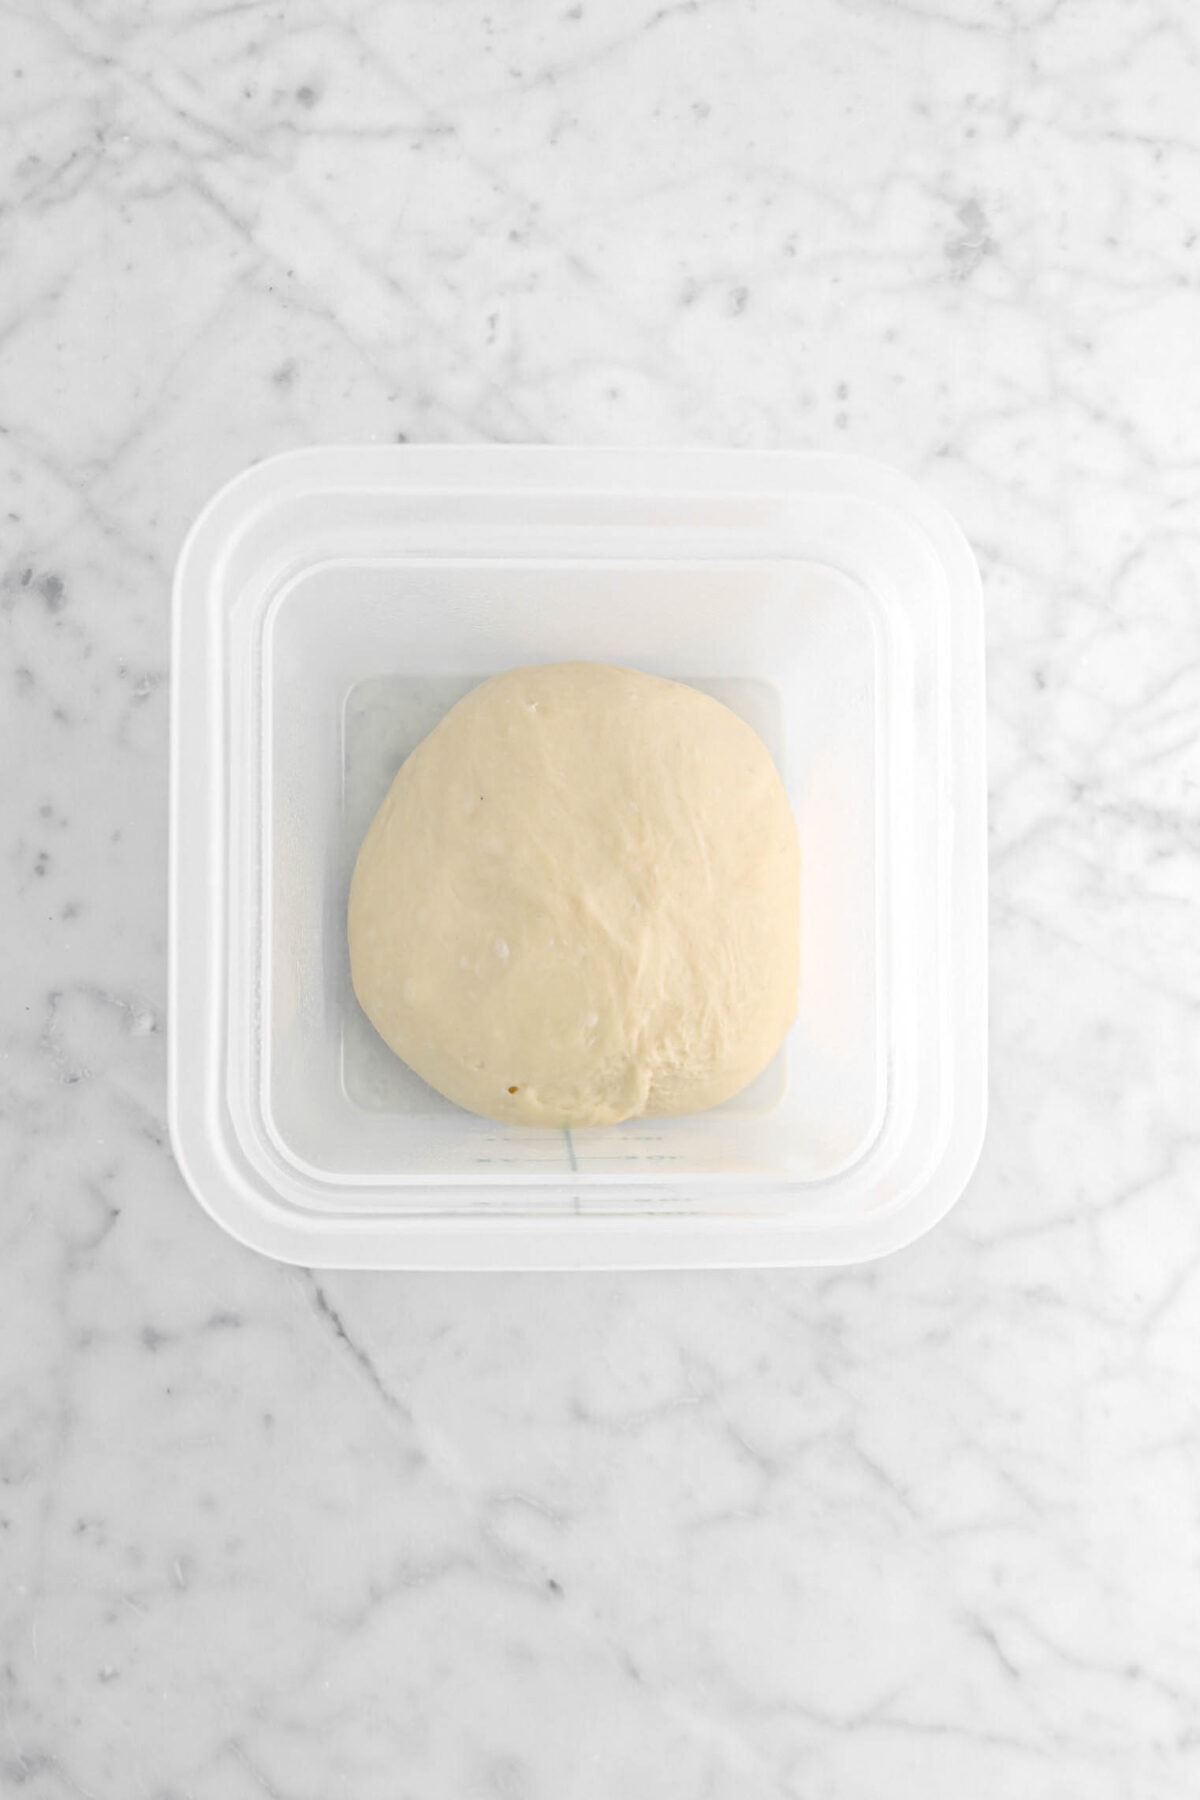 dough in plastic container on marble surface